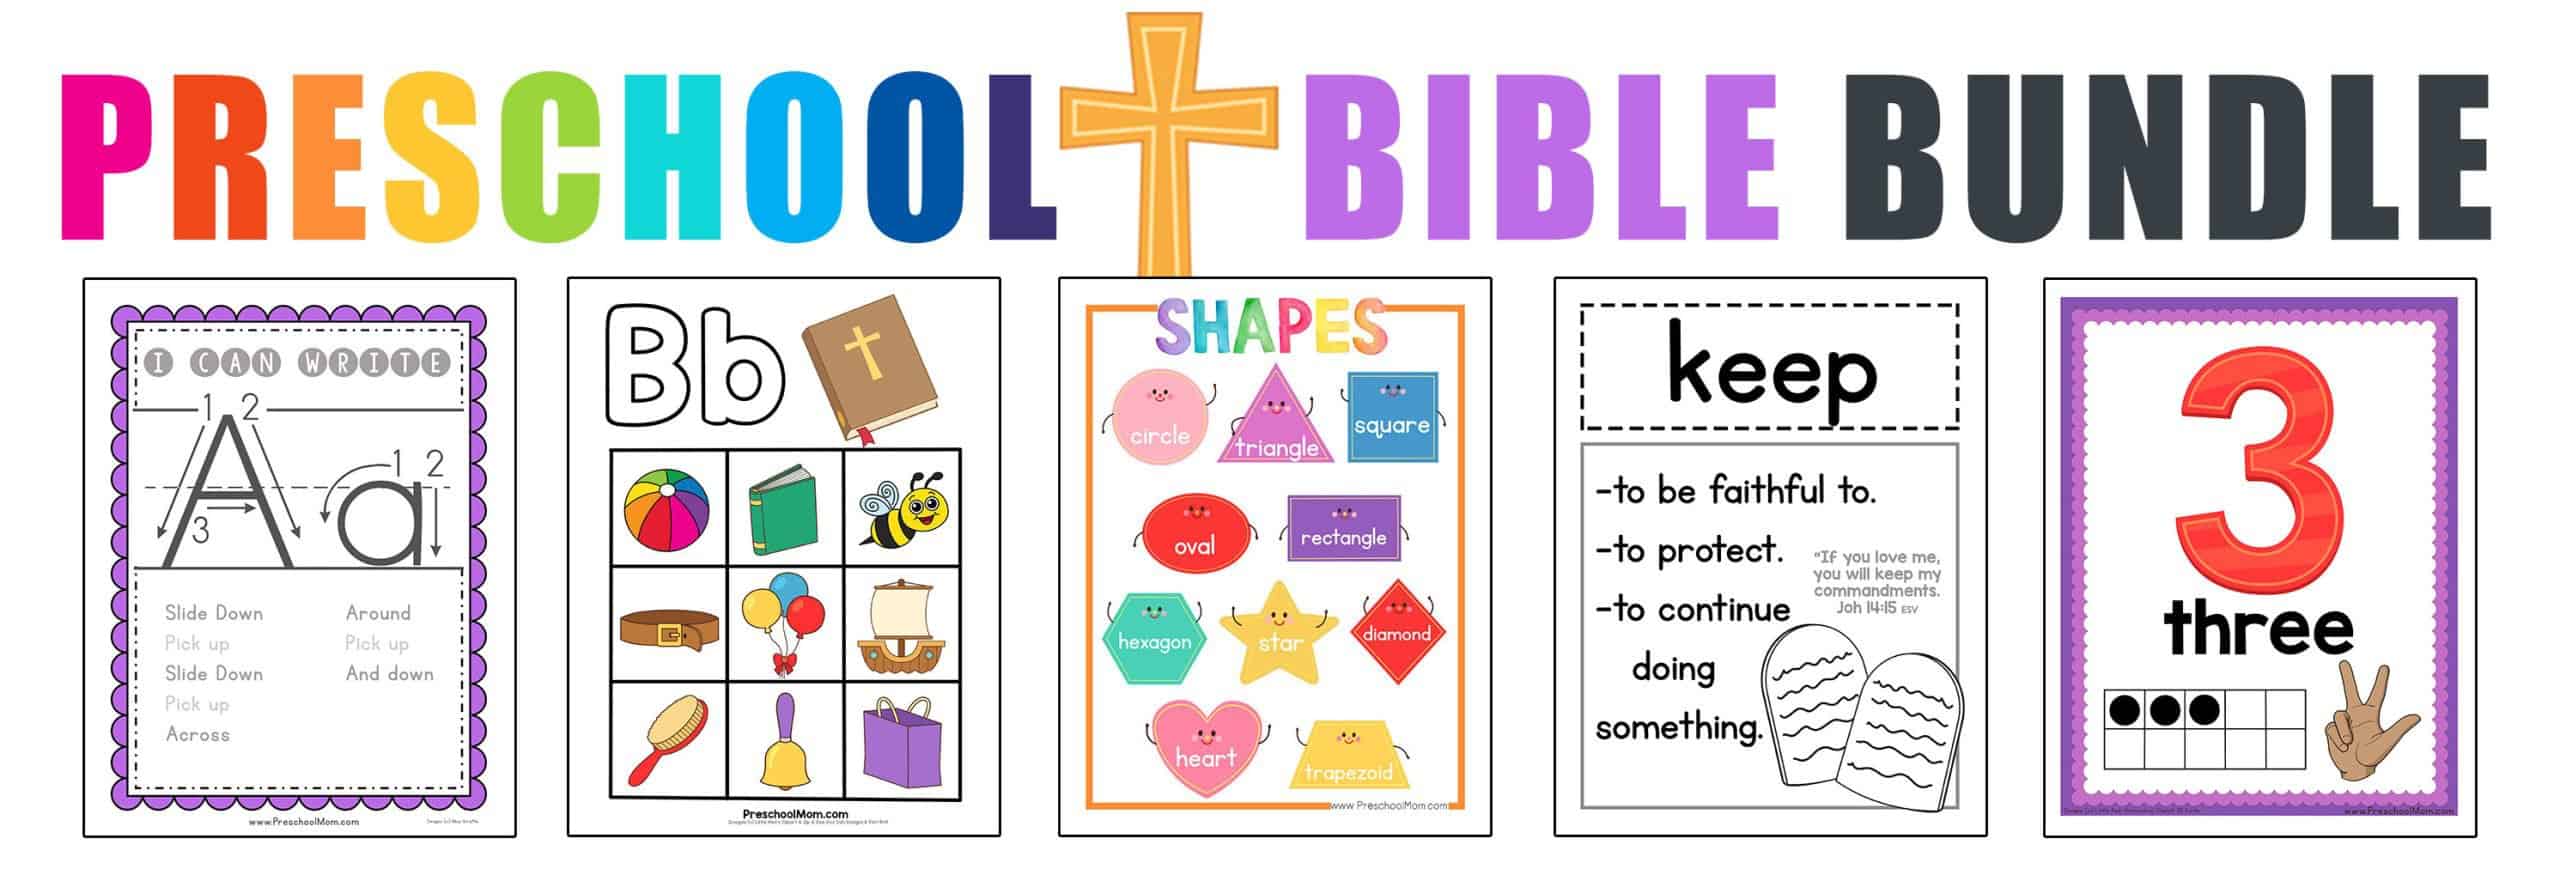 ABCs of Bible Crafts for Kids Christian Montessori Network Bible